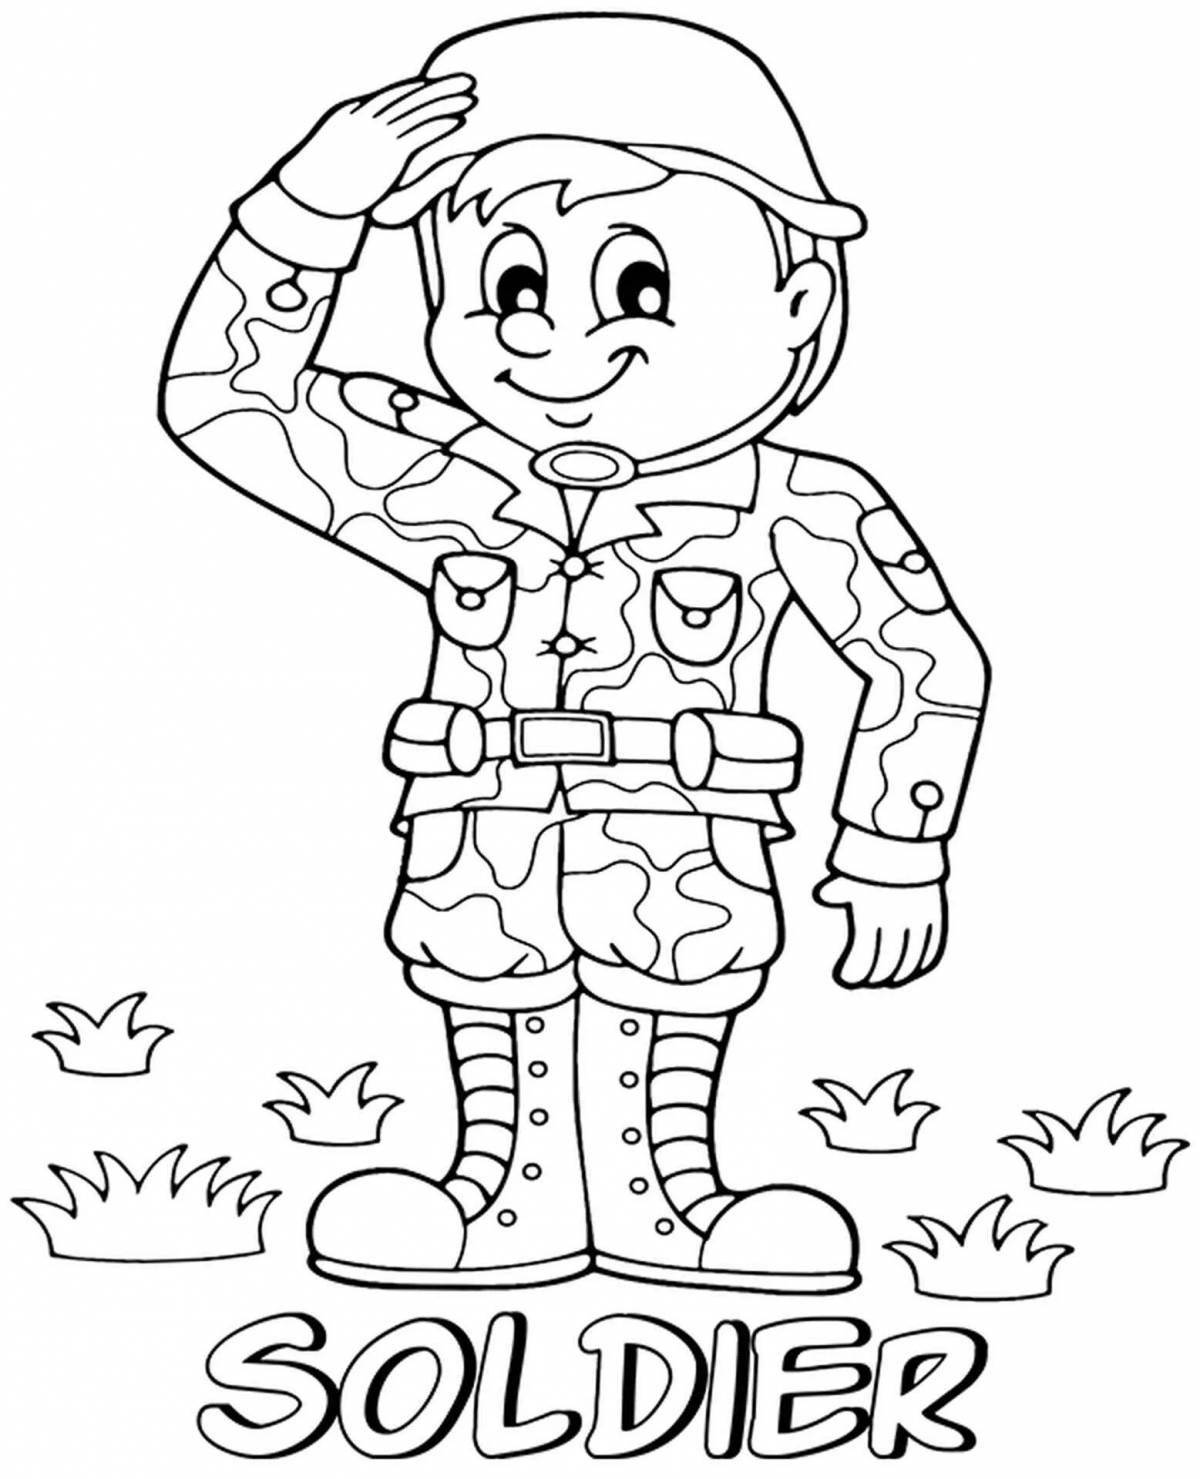 Fun coloring of a soldier's face for kids